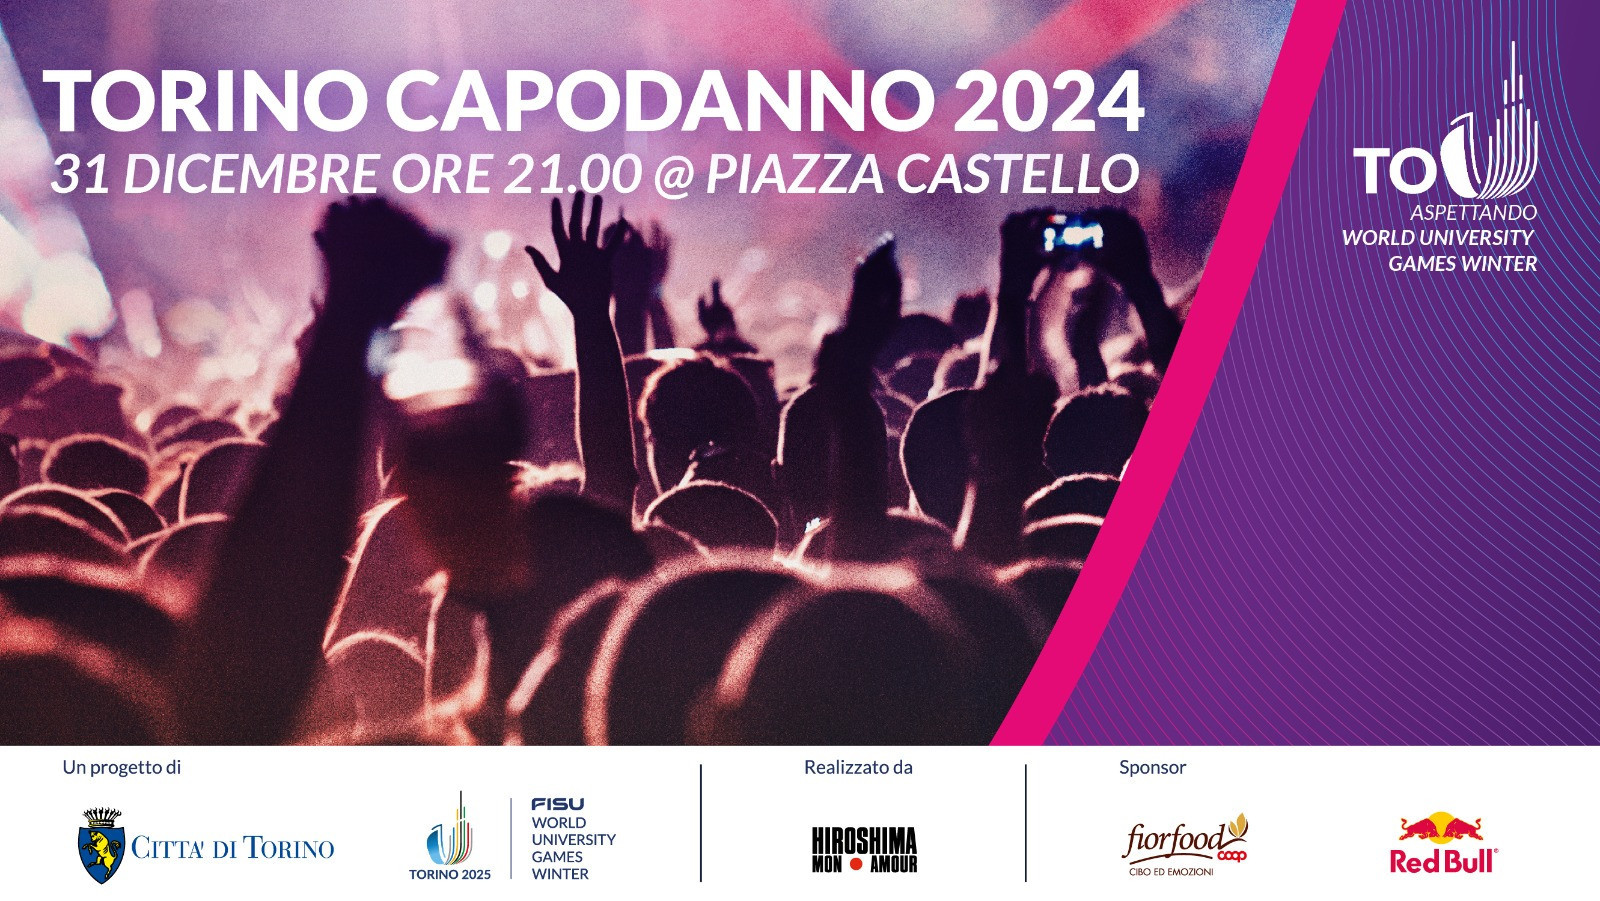 Torino 2025, a special New Year's Eve event